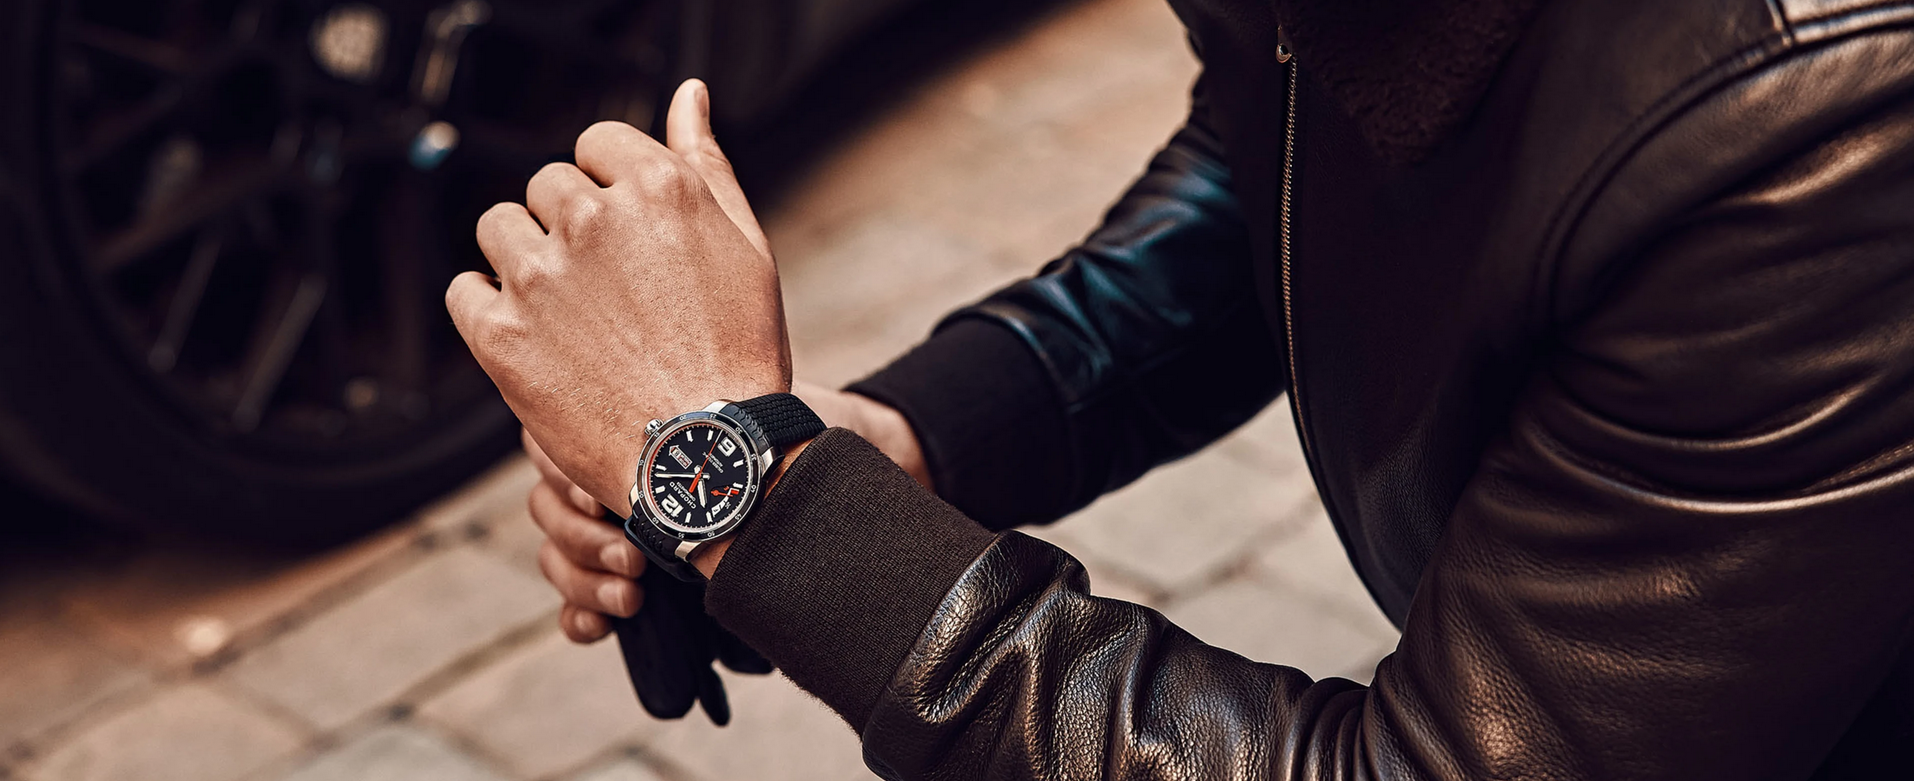 Elevate Your Sporty Look with Chopard’s Luxury Sport Watch Selections